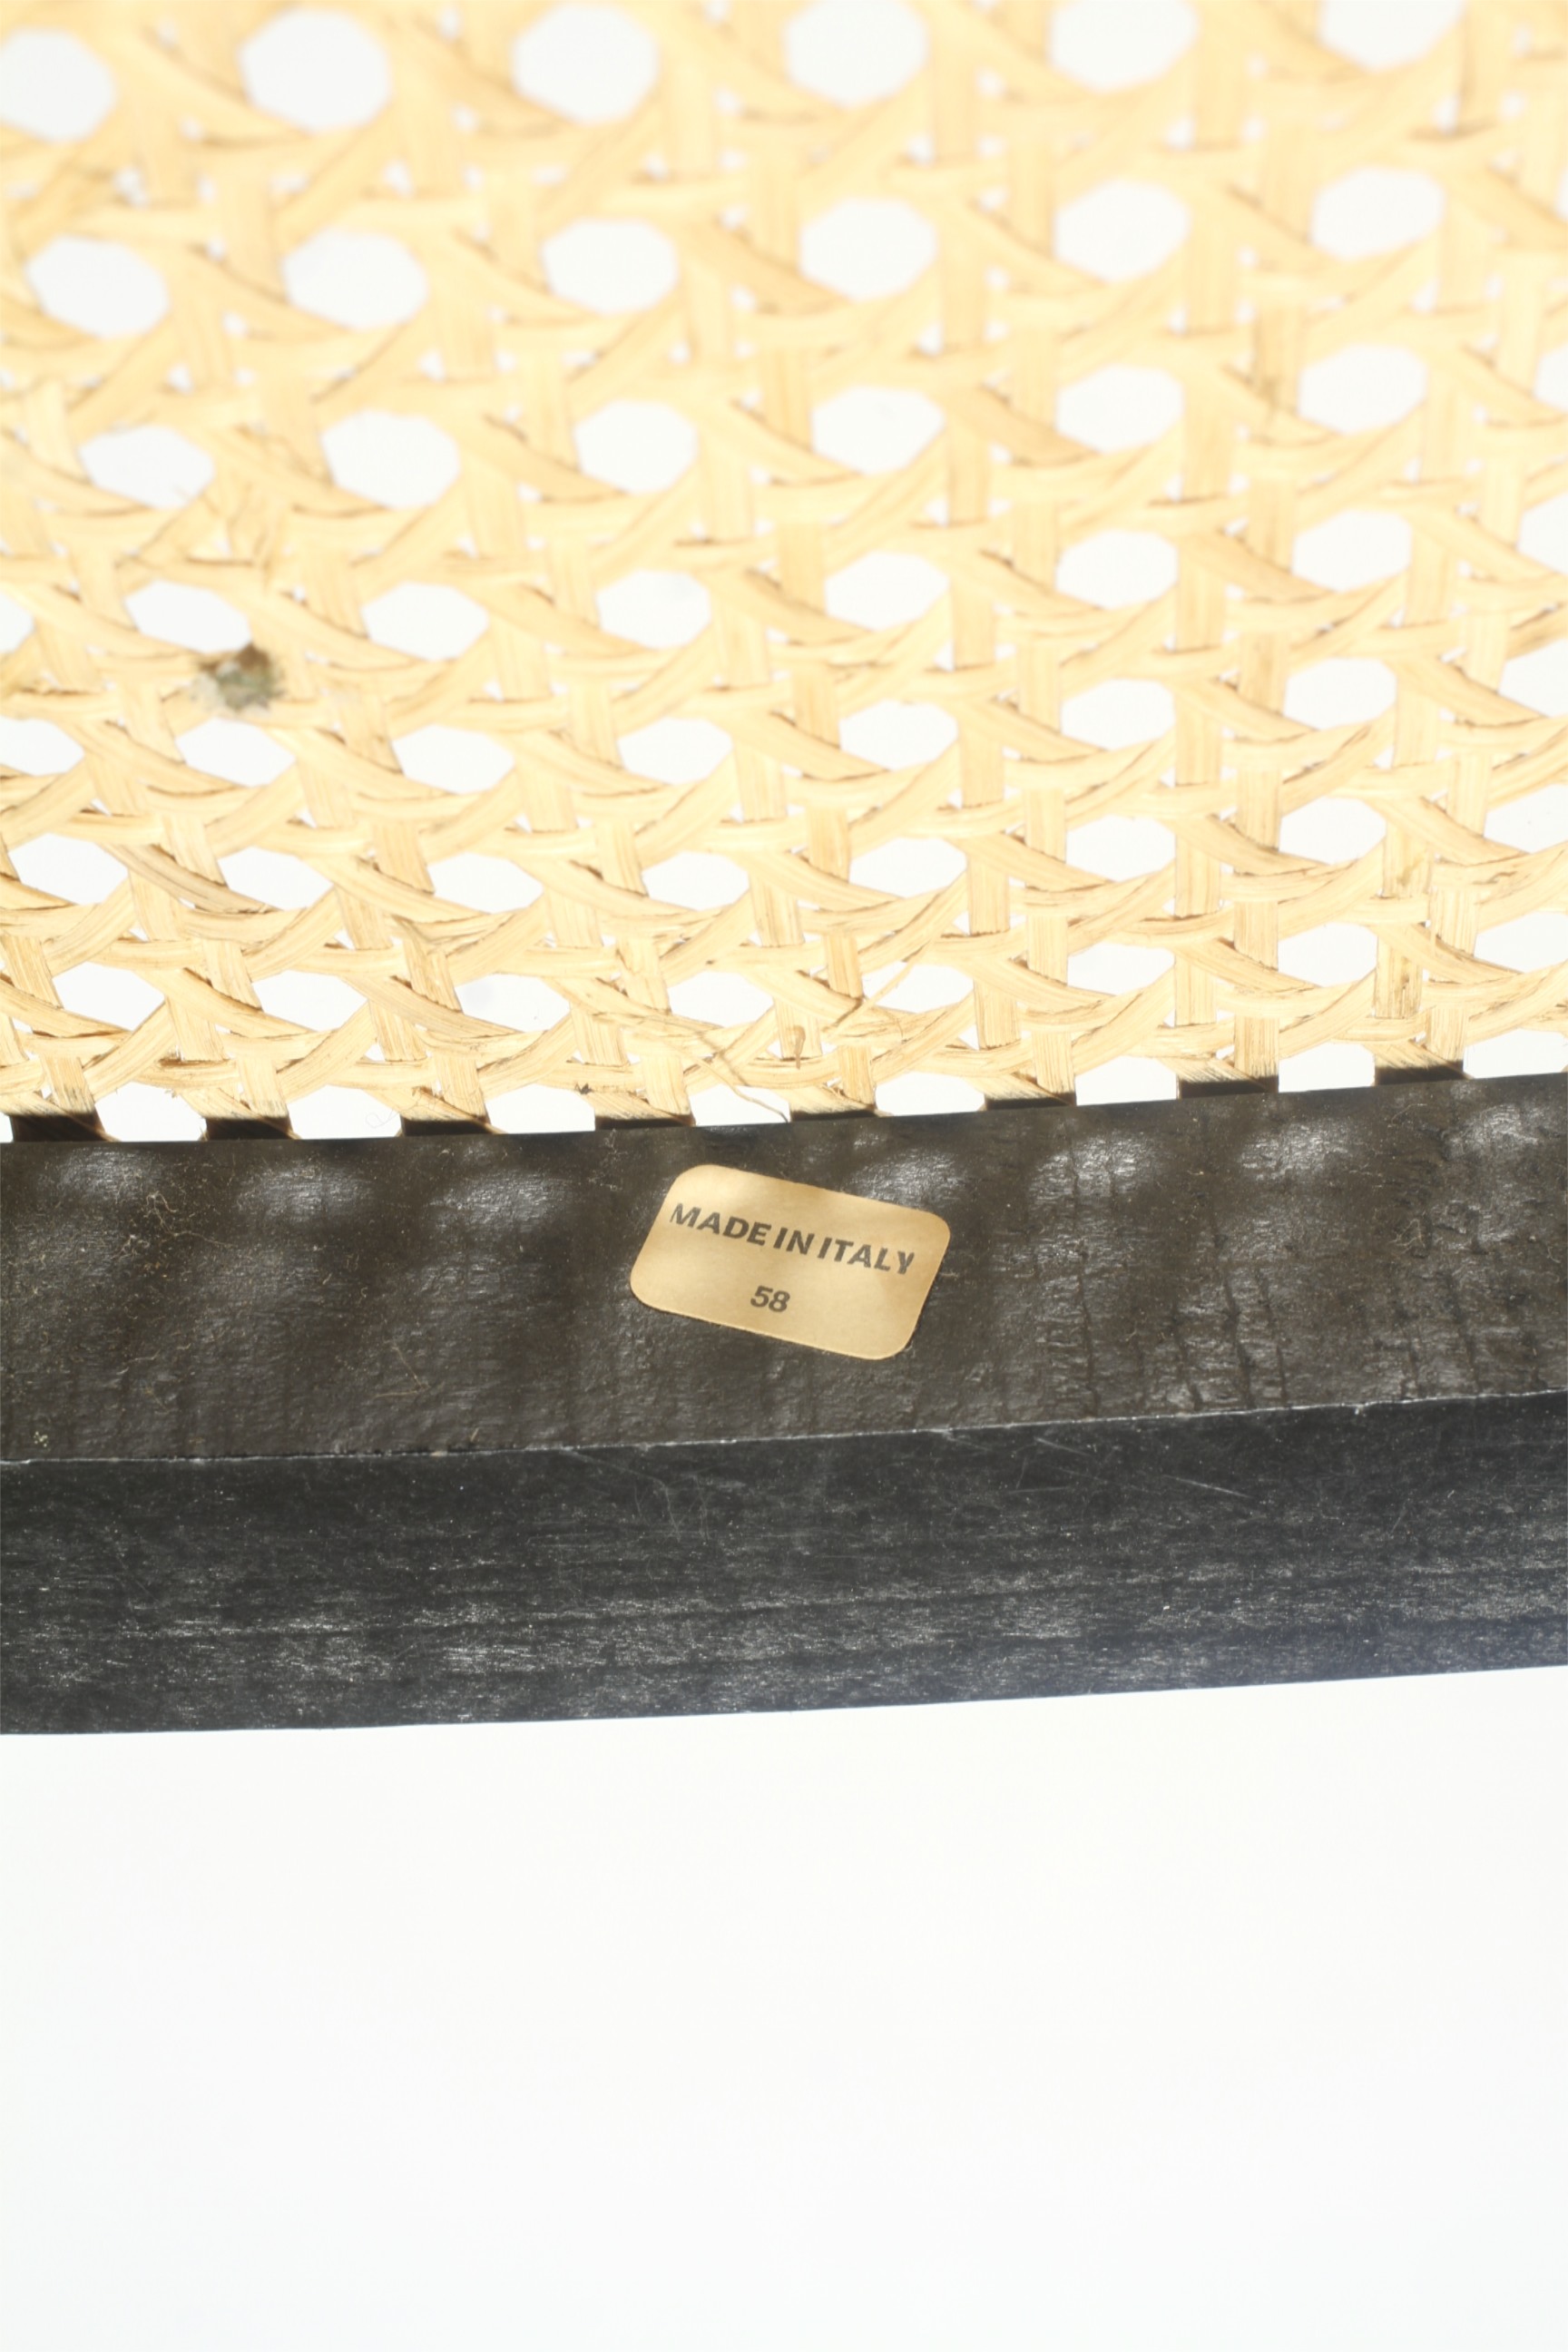 Six 'Cesca' style rattan chair seat replacement bases. Stamped or labelled 'Made in Italy'. 46. - Image 5 of 5